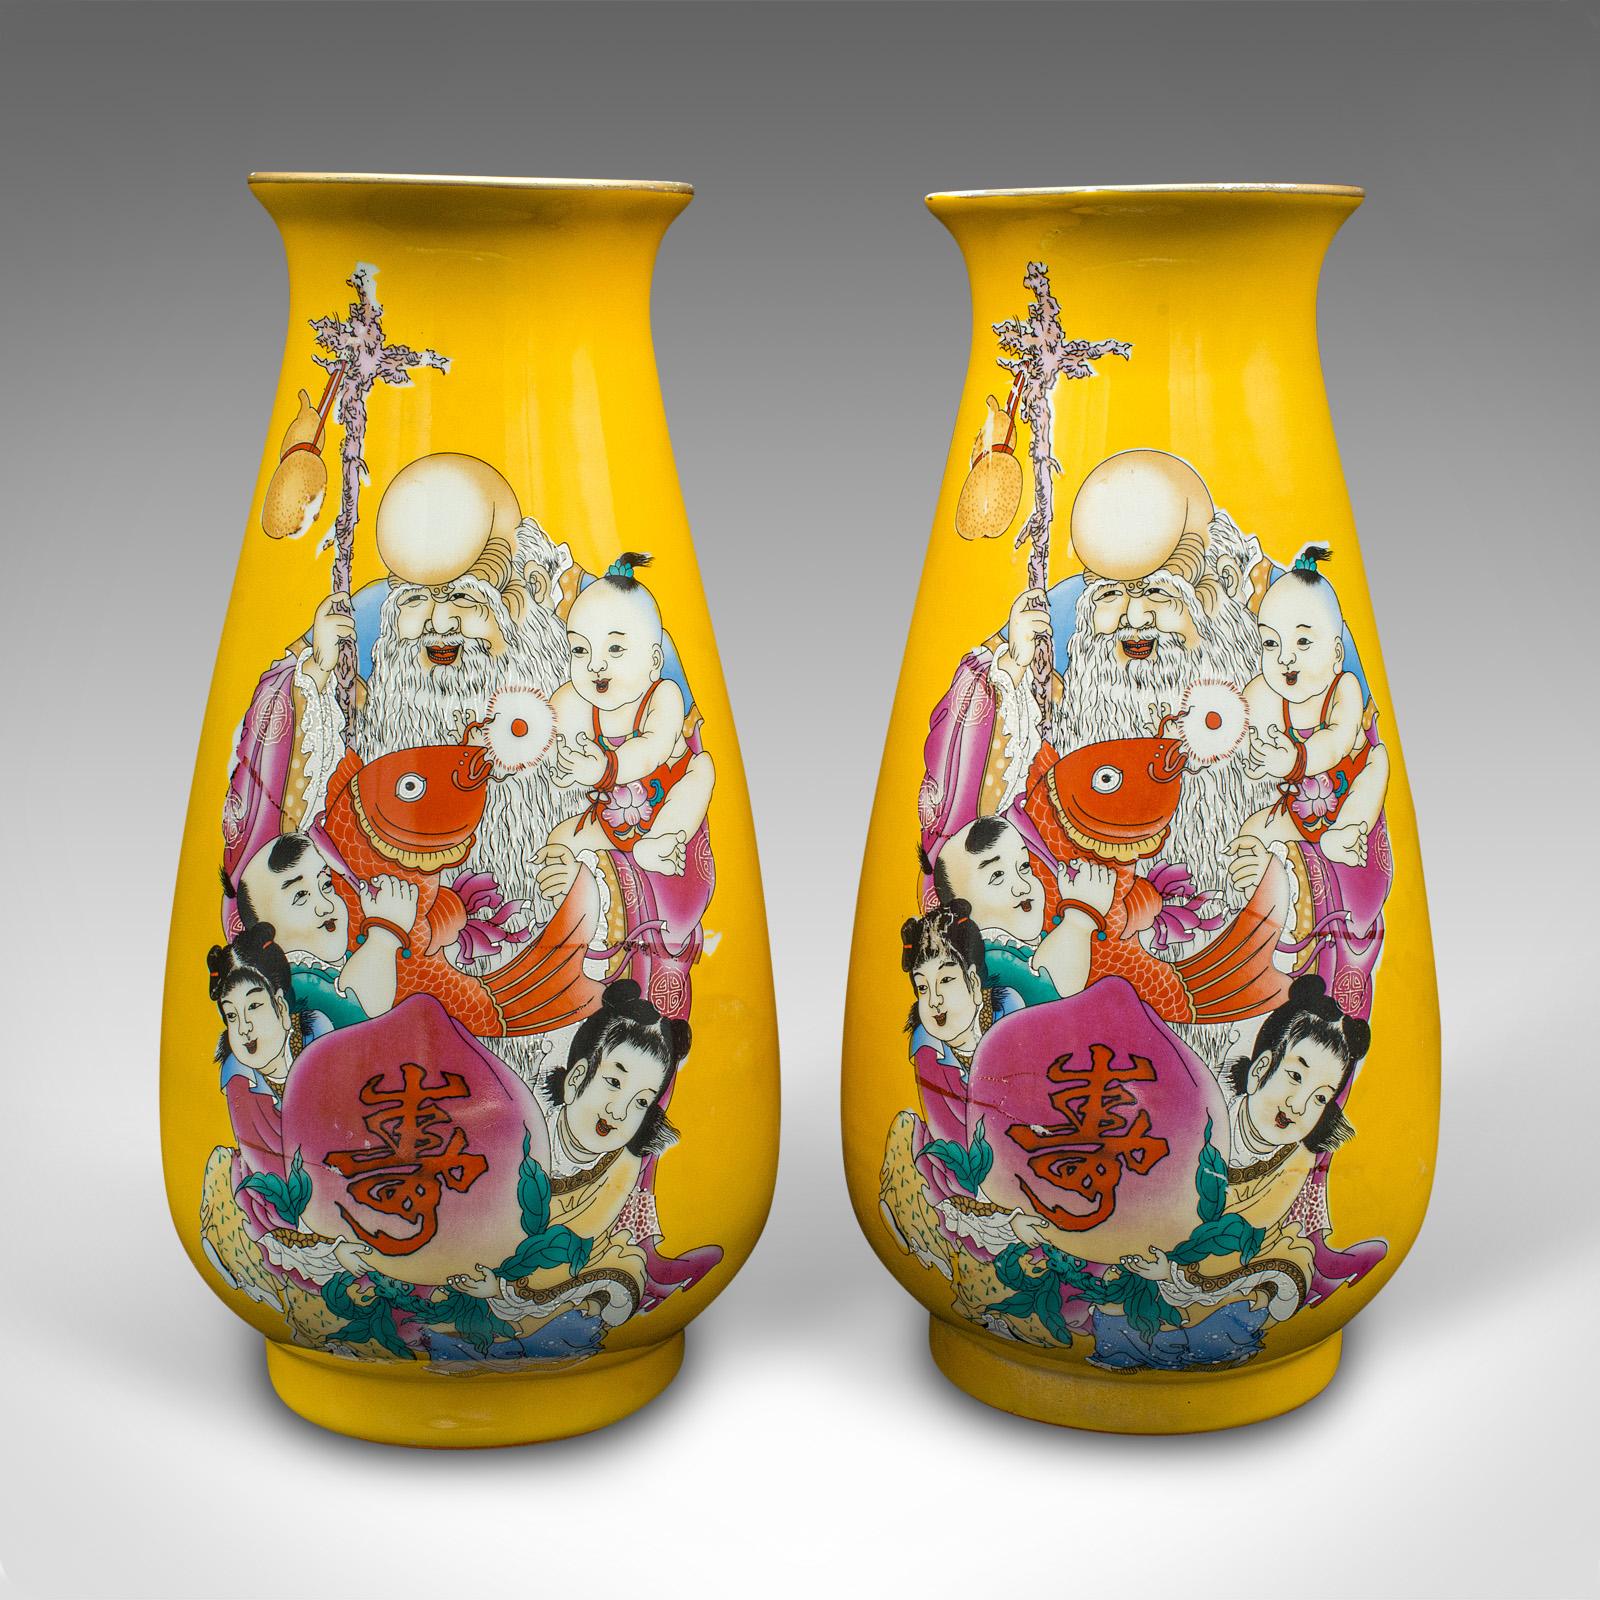 This is a pair of vintage character vases. A Chinese, ceramic baluster urn with figural decor, dating to the Art Deco period, circa 1940.

Striking colour and with distinctive appeal
Displaying a desirable aged patina and in good order
Deep yellow